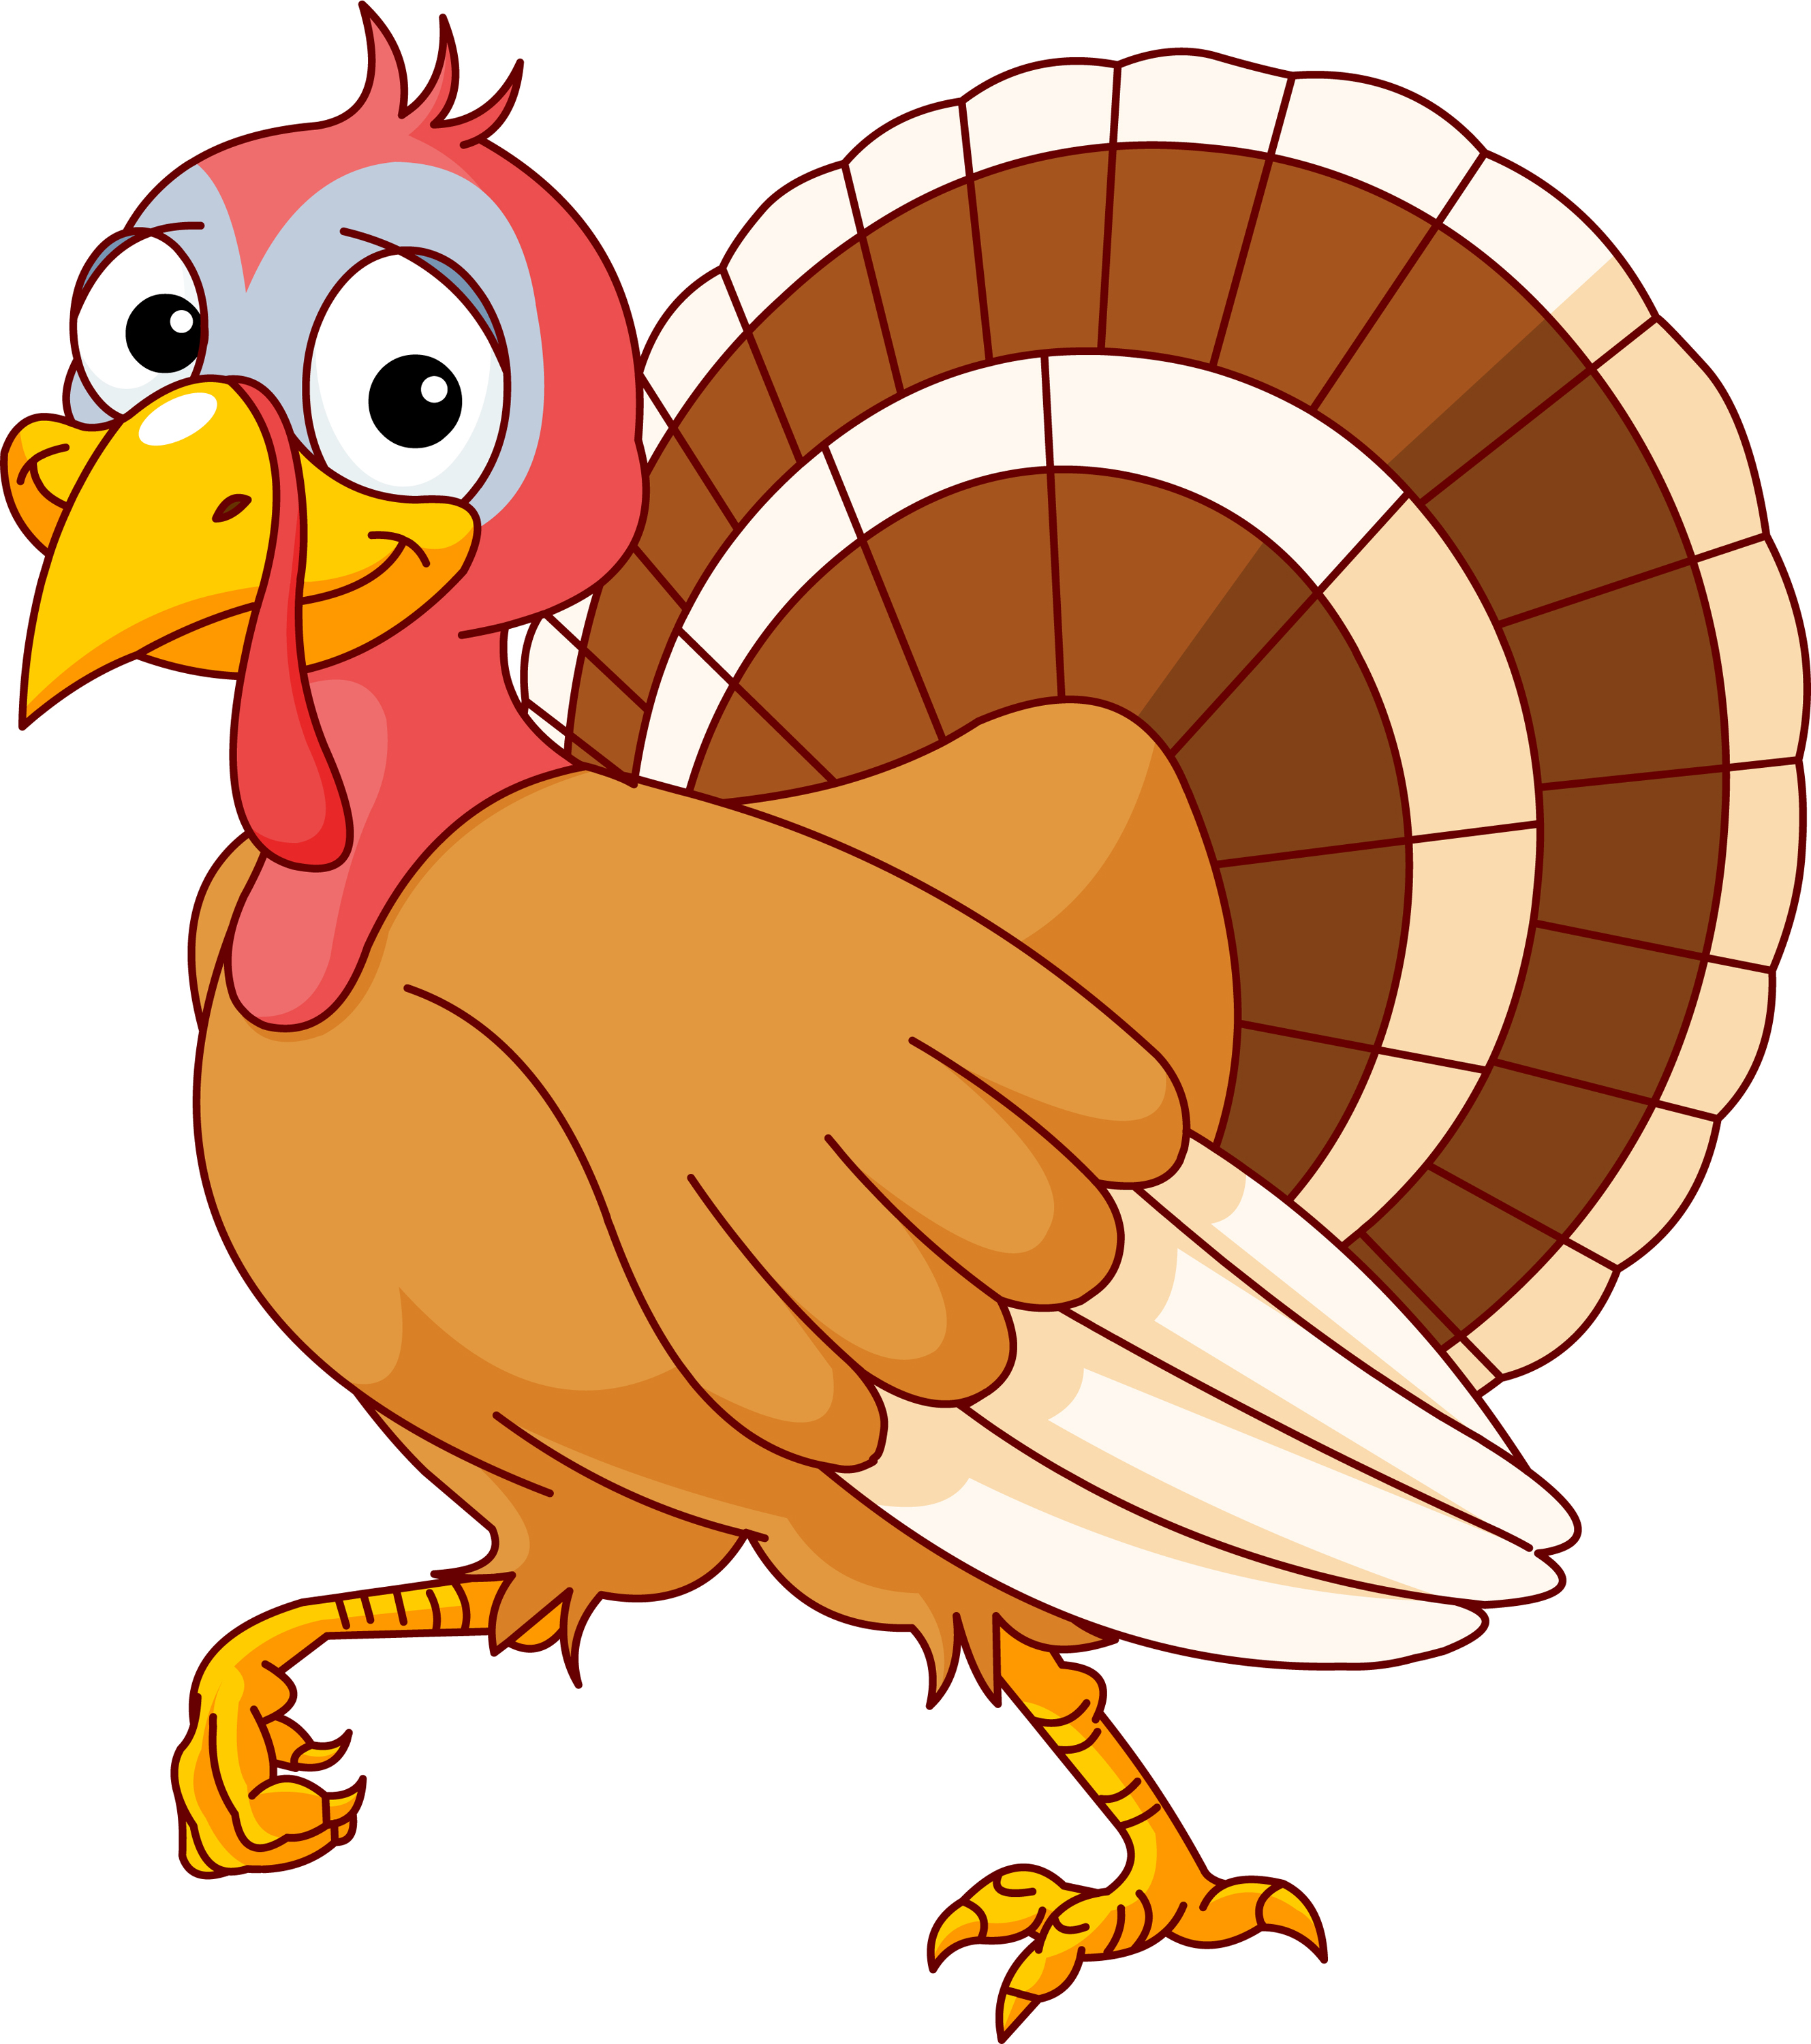 nerd-culture-podcast-blog-archive-interview-with-a-turkey